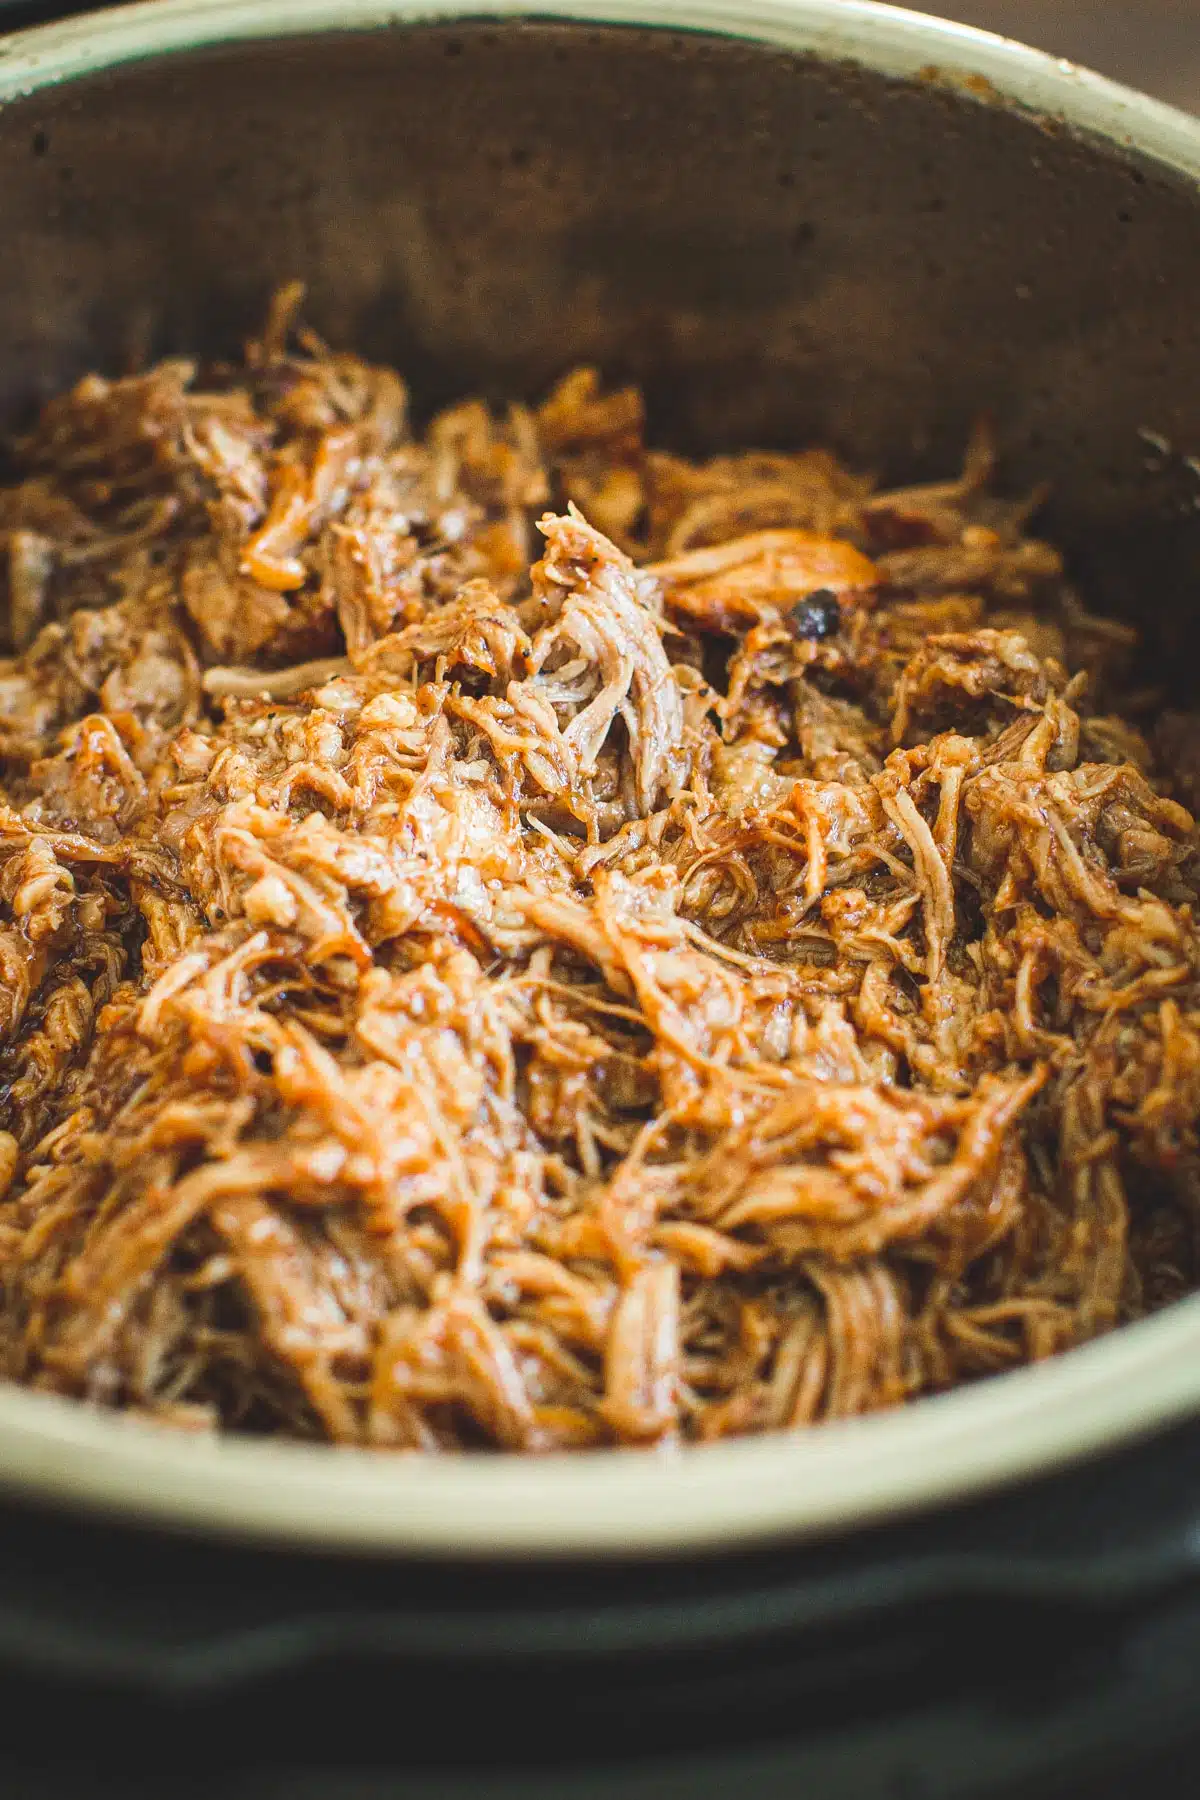 Pulled pork in an Instant Pot.